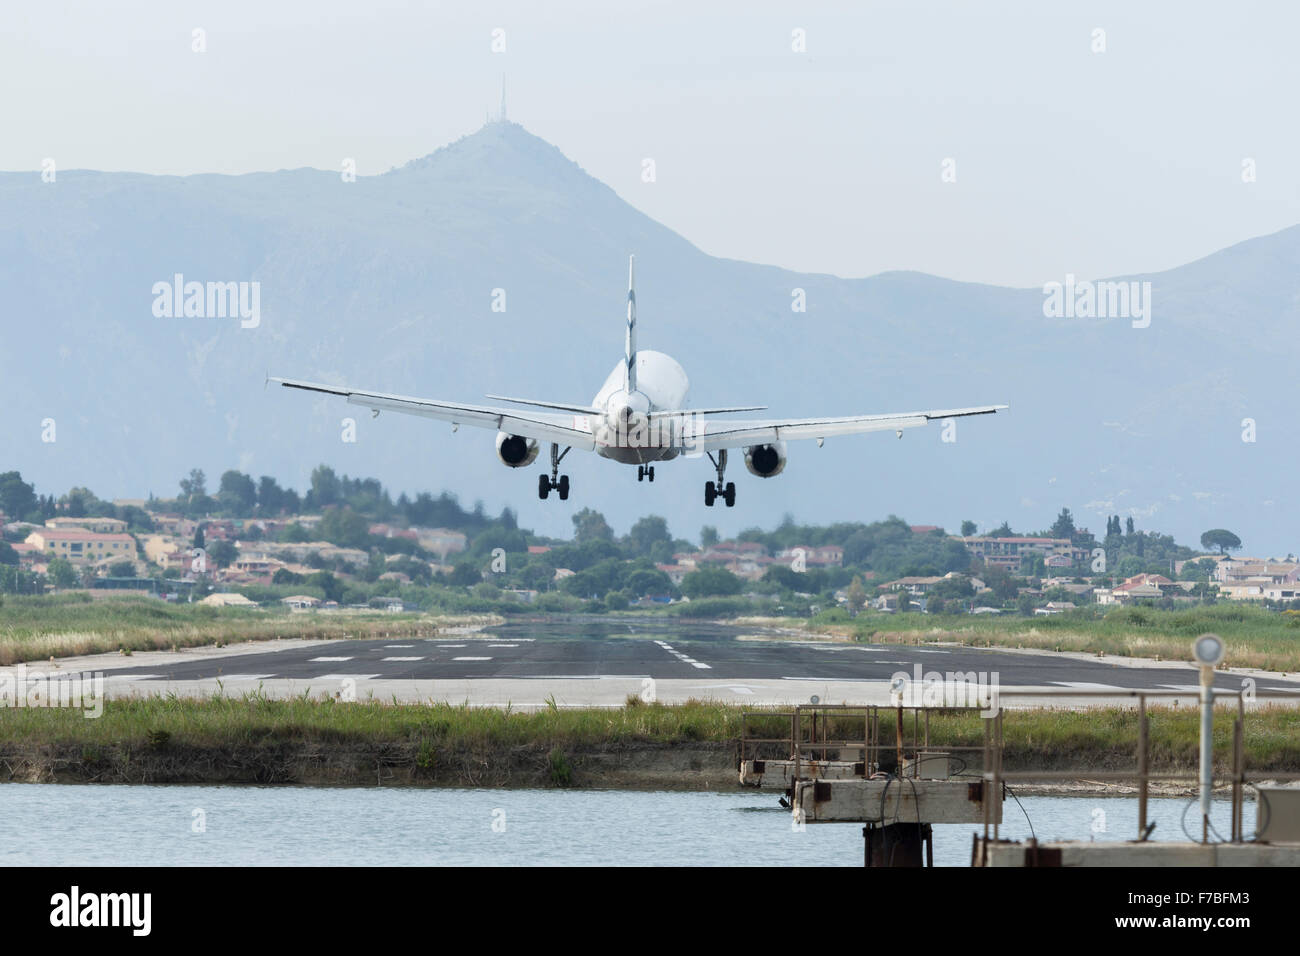 Airbus A320-232 owned by Aegean Airlines coming into land at Corfu International Airport, CFU, Greece Stock Photo